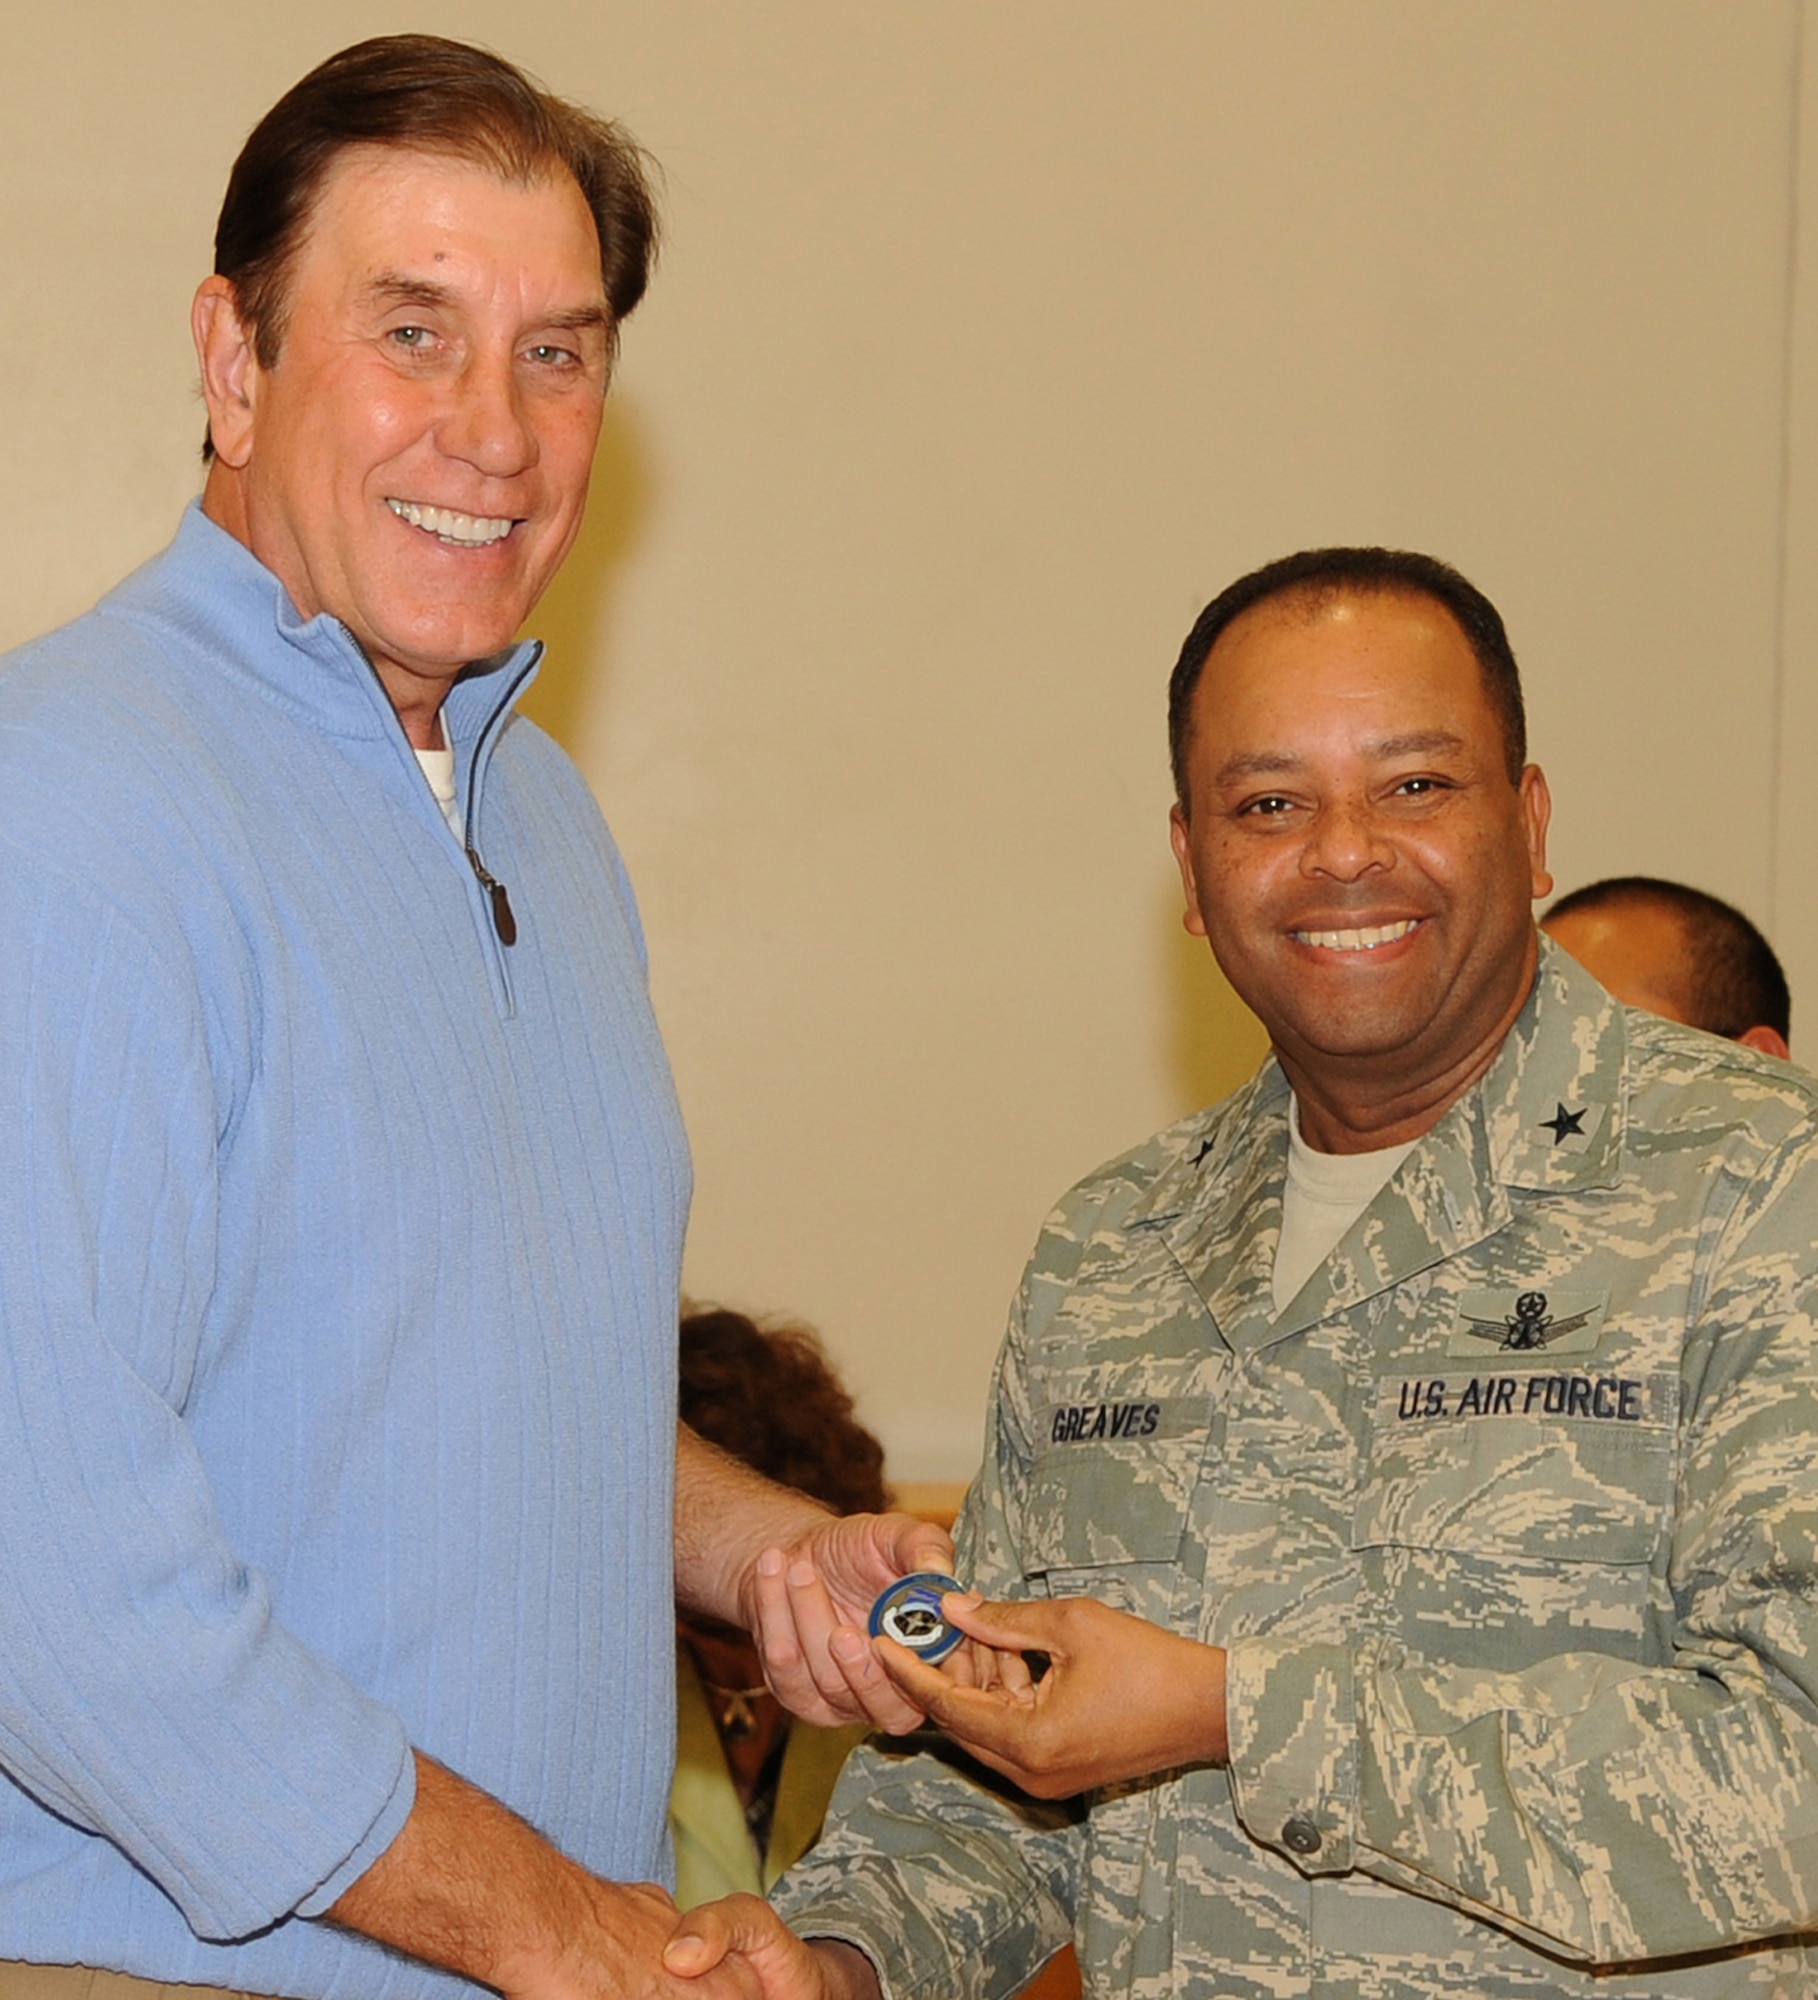 Brig. Gen. Samuel Greaves (right), MILSATCOM Wing commander, presents a unit coin to Rudy Tomjanovich, former NBA champion, gold medal head coach of the Houston Rockets and the Men’s Basketball team for the 2000 Olympics, and former head coach of the Los Angeles Lakers, Feb. 12.  Coach Tomjanovich visited the Space and Missile Center to support the troops as an invitation from his personal friend, Tom Meseroll, MILSATCOM Chief Engineer’s Office senior contractor. He stayed to watch team MCSW play its Intramural Basketball league game at the base gymnasium. (Photo by Stephen Schester) (released)

